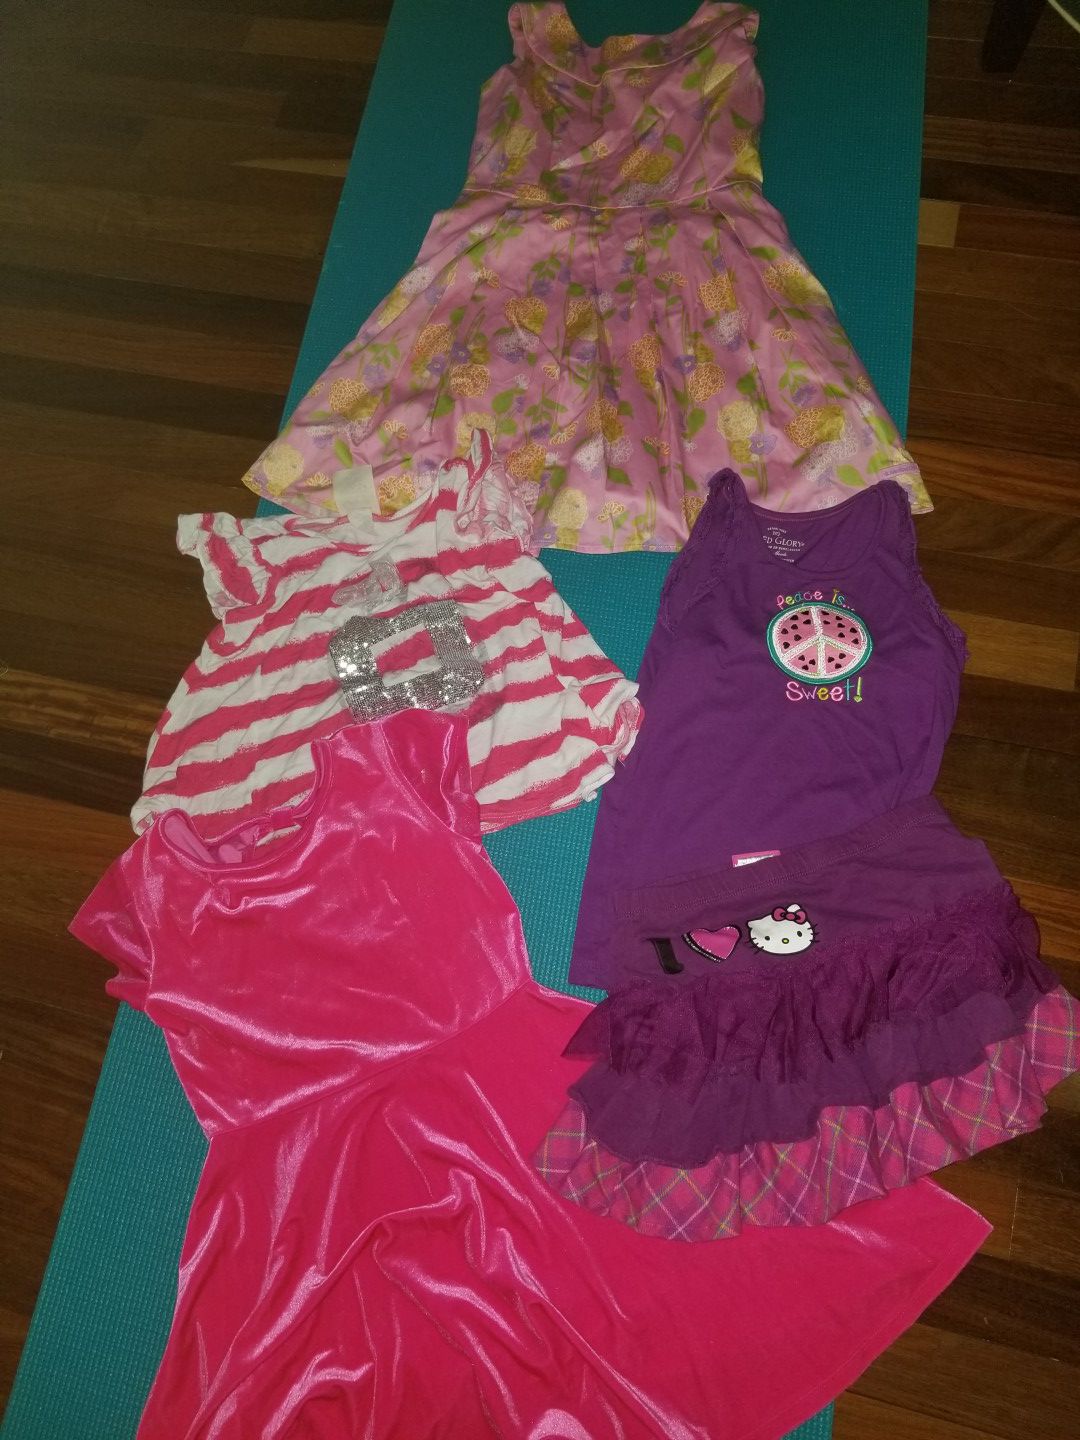 for girls size 7 / 8, 2 dresses, 2 shirts, 1 skirt, only $5!